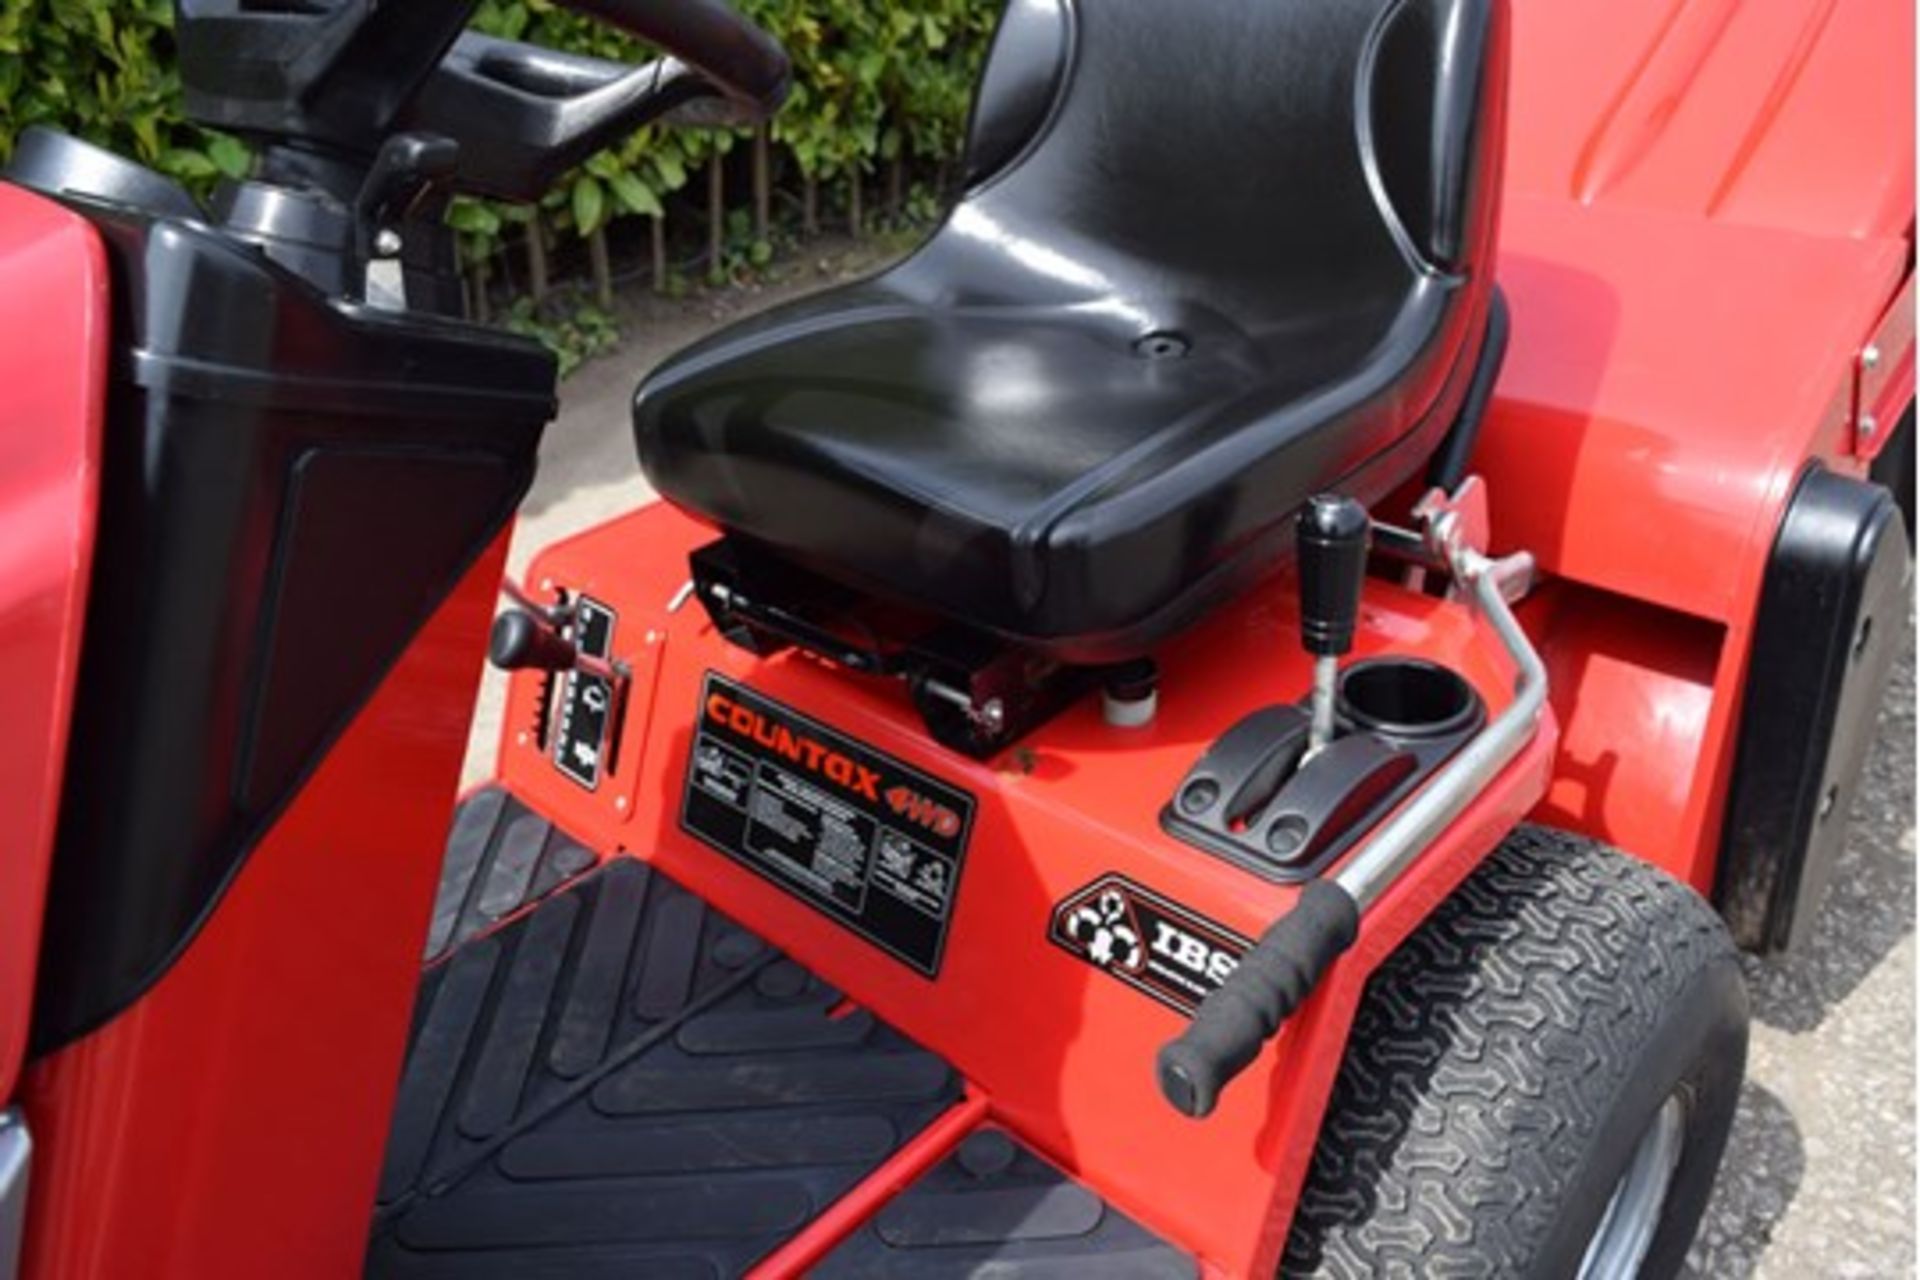 2010 Countax C600H 4WD 40" Rear Discharge Garden Tractor With PGC - Image 6 of 6